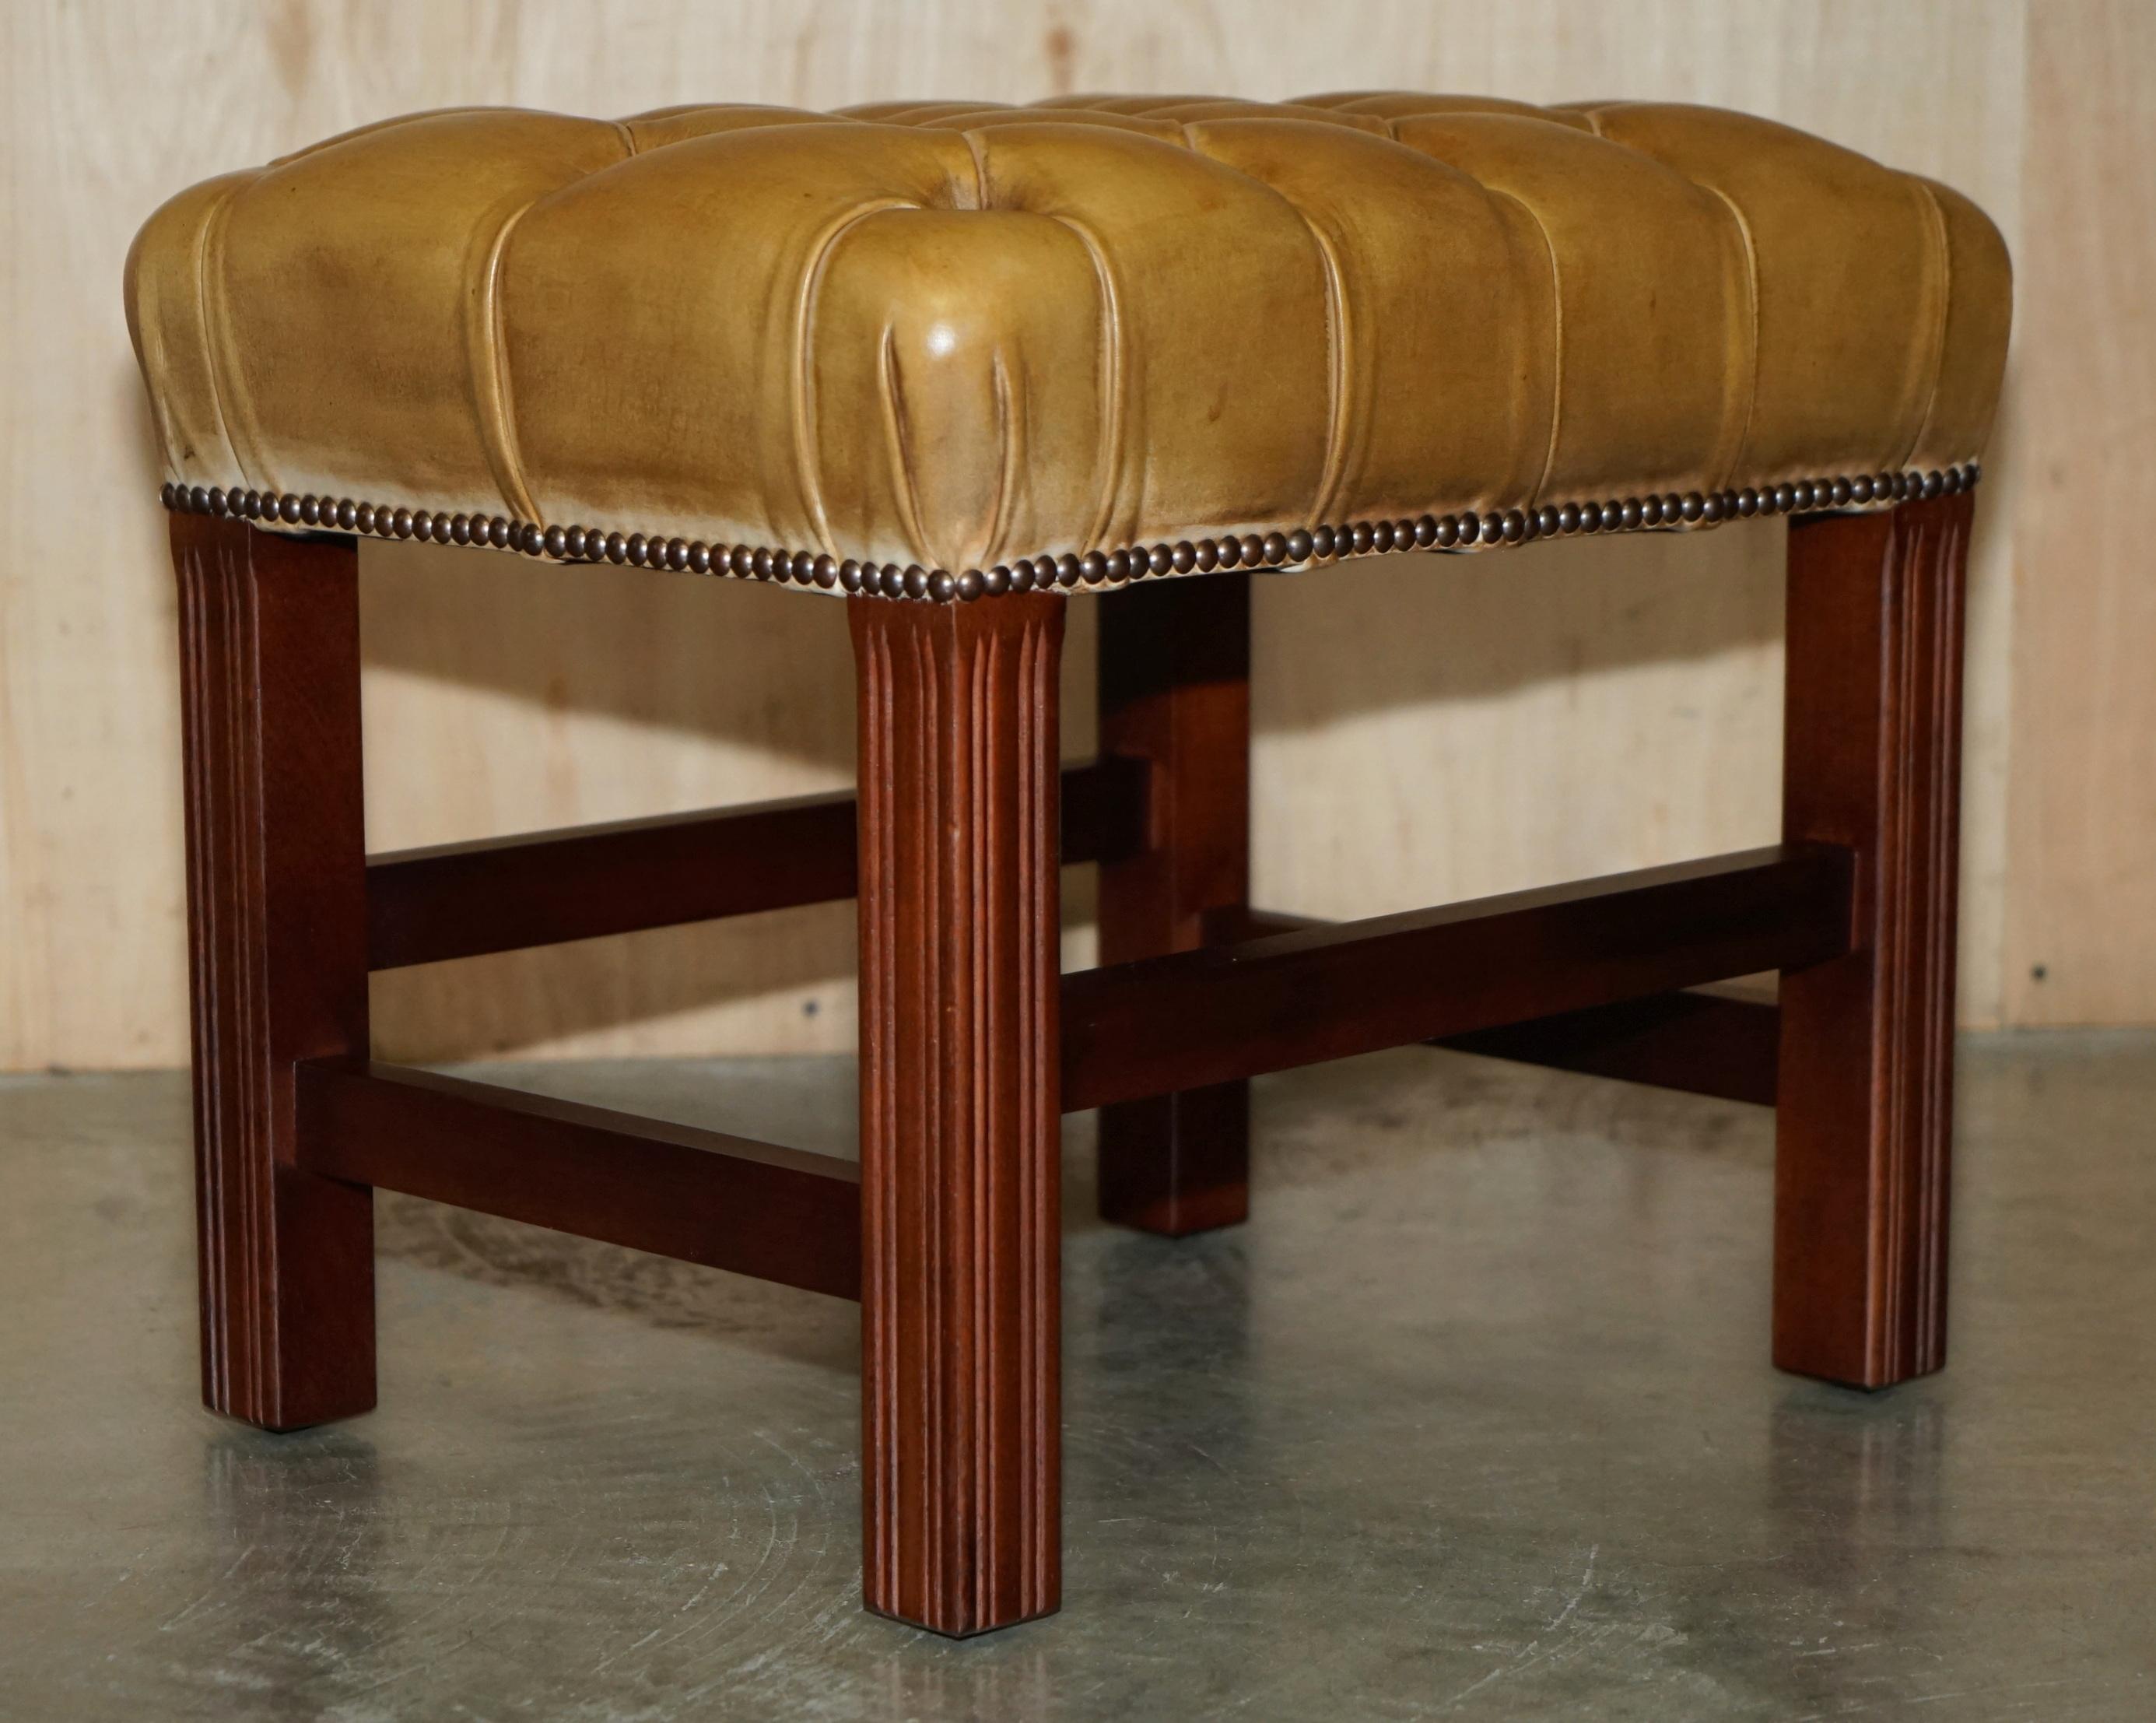 20th Century VINTAGE TAN BROWN LEATHER CHESTERFIELD TUFTED BARON FOOTSTOOL PART OF SUiTE For Sale